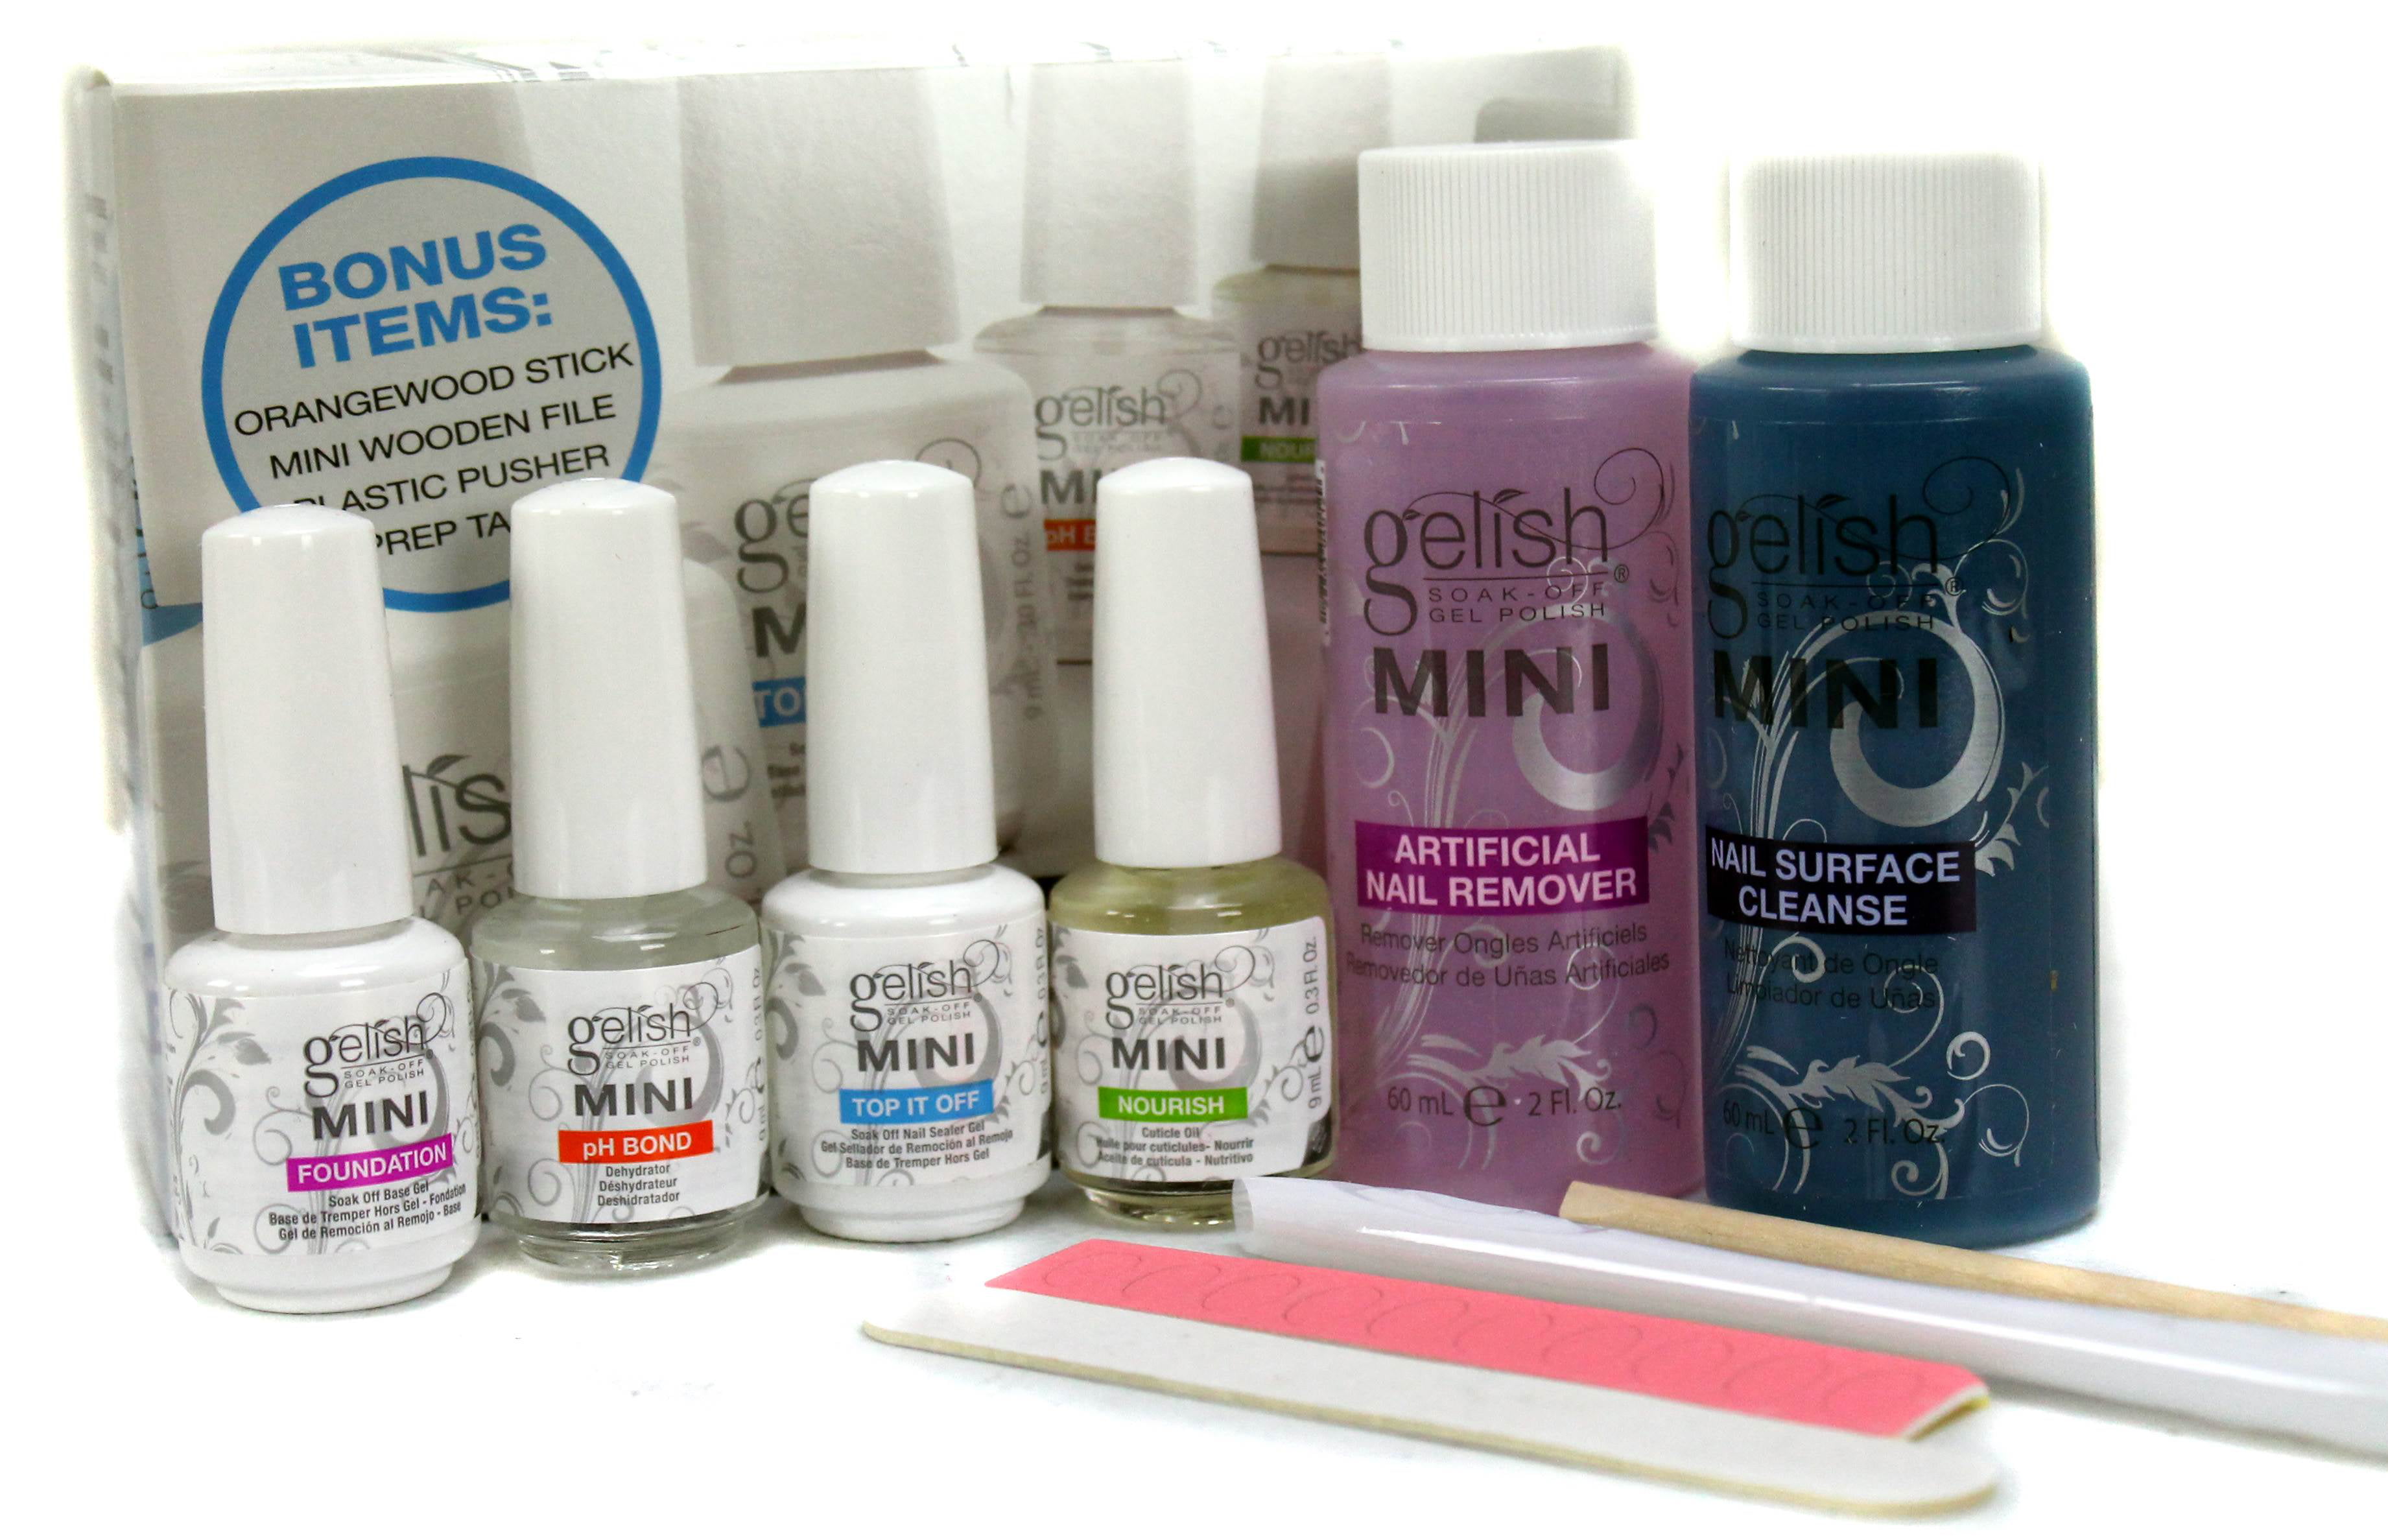 9. Gelish Nail Polish Color Swatches - wide 5